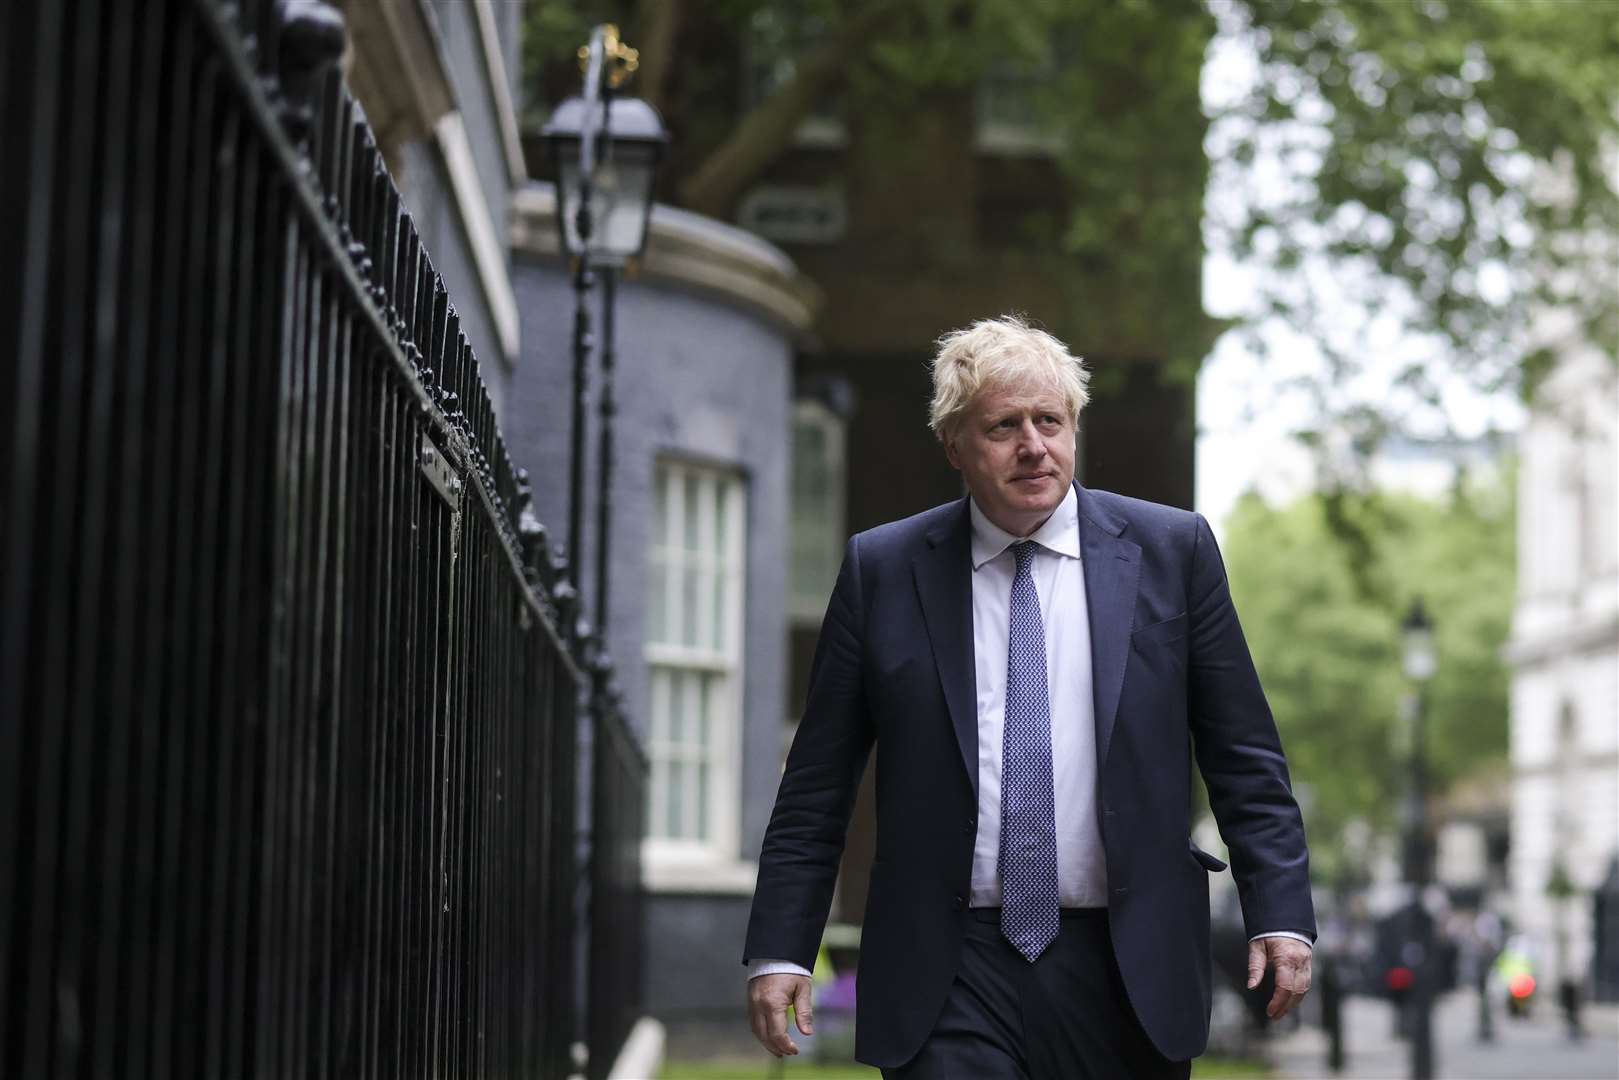 Prime Minister Boris Johnson is set to leave Downing Street.